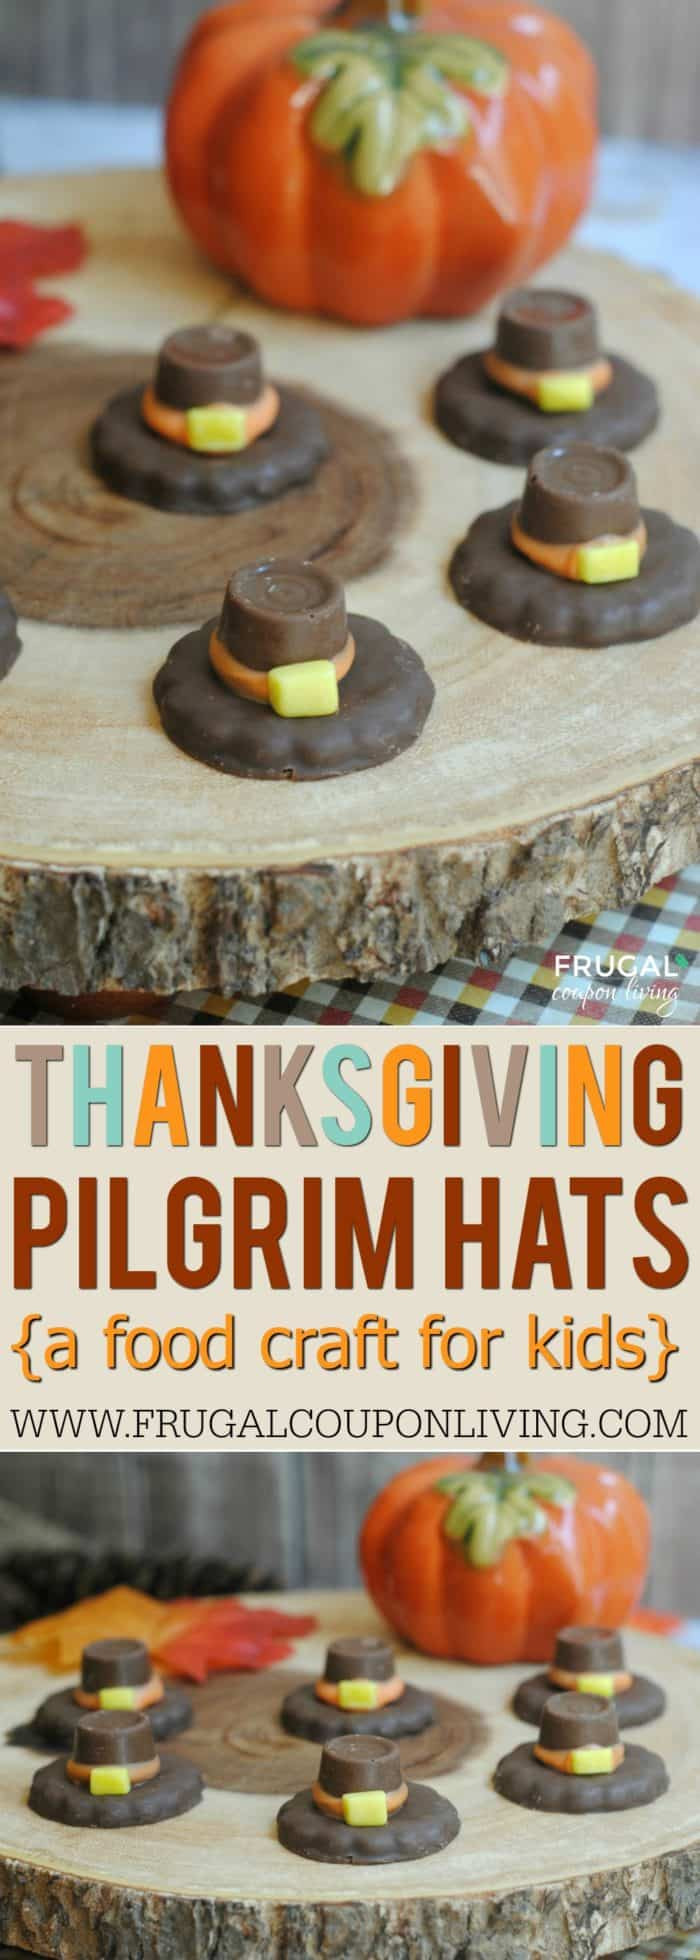 Thanksgiving Food Crafts For Kids
 Kids Thanksgiving Food Craft Pilgrim Hats Fall Tradition